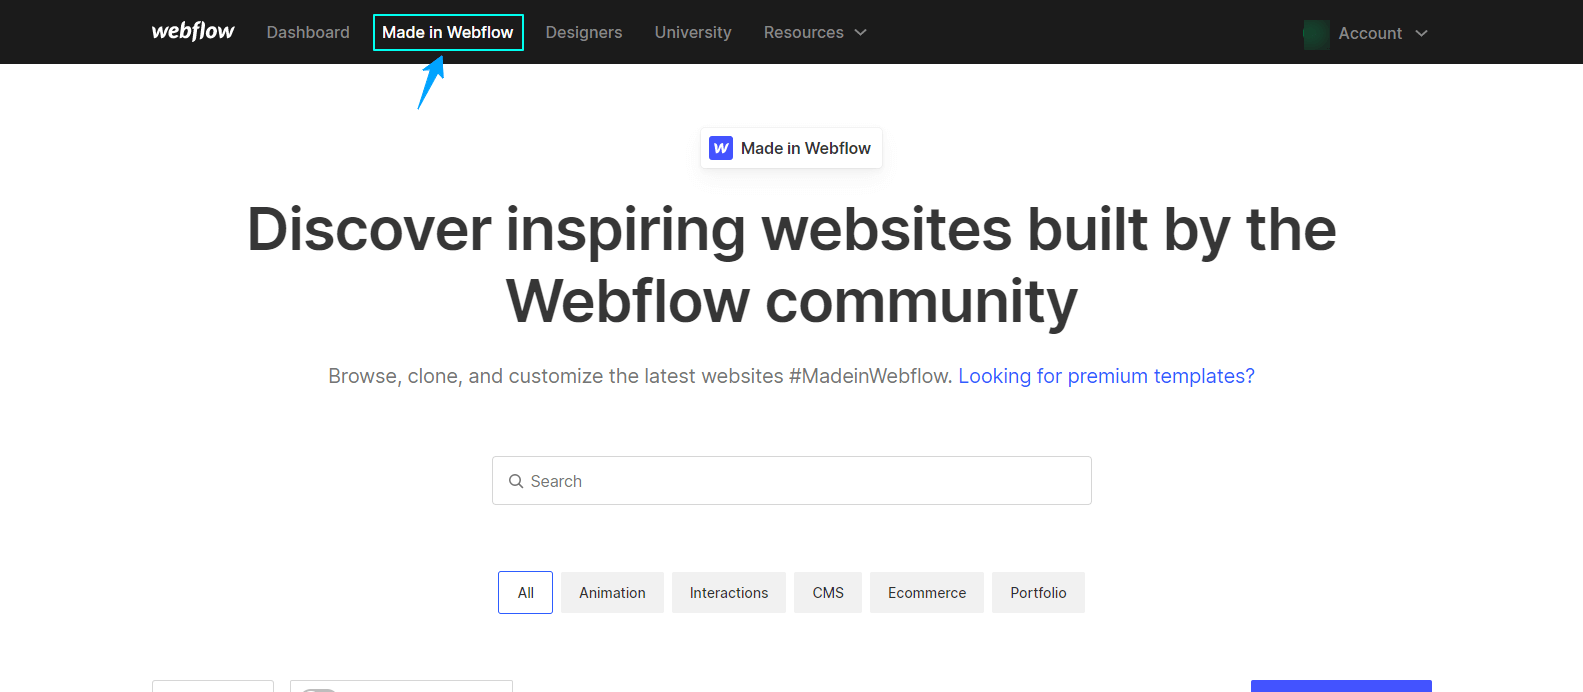 Made in Webflow tab of Webflow for design inspirations.